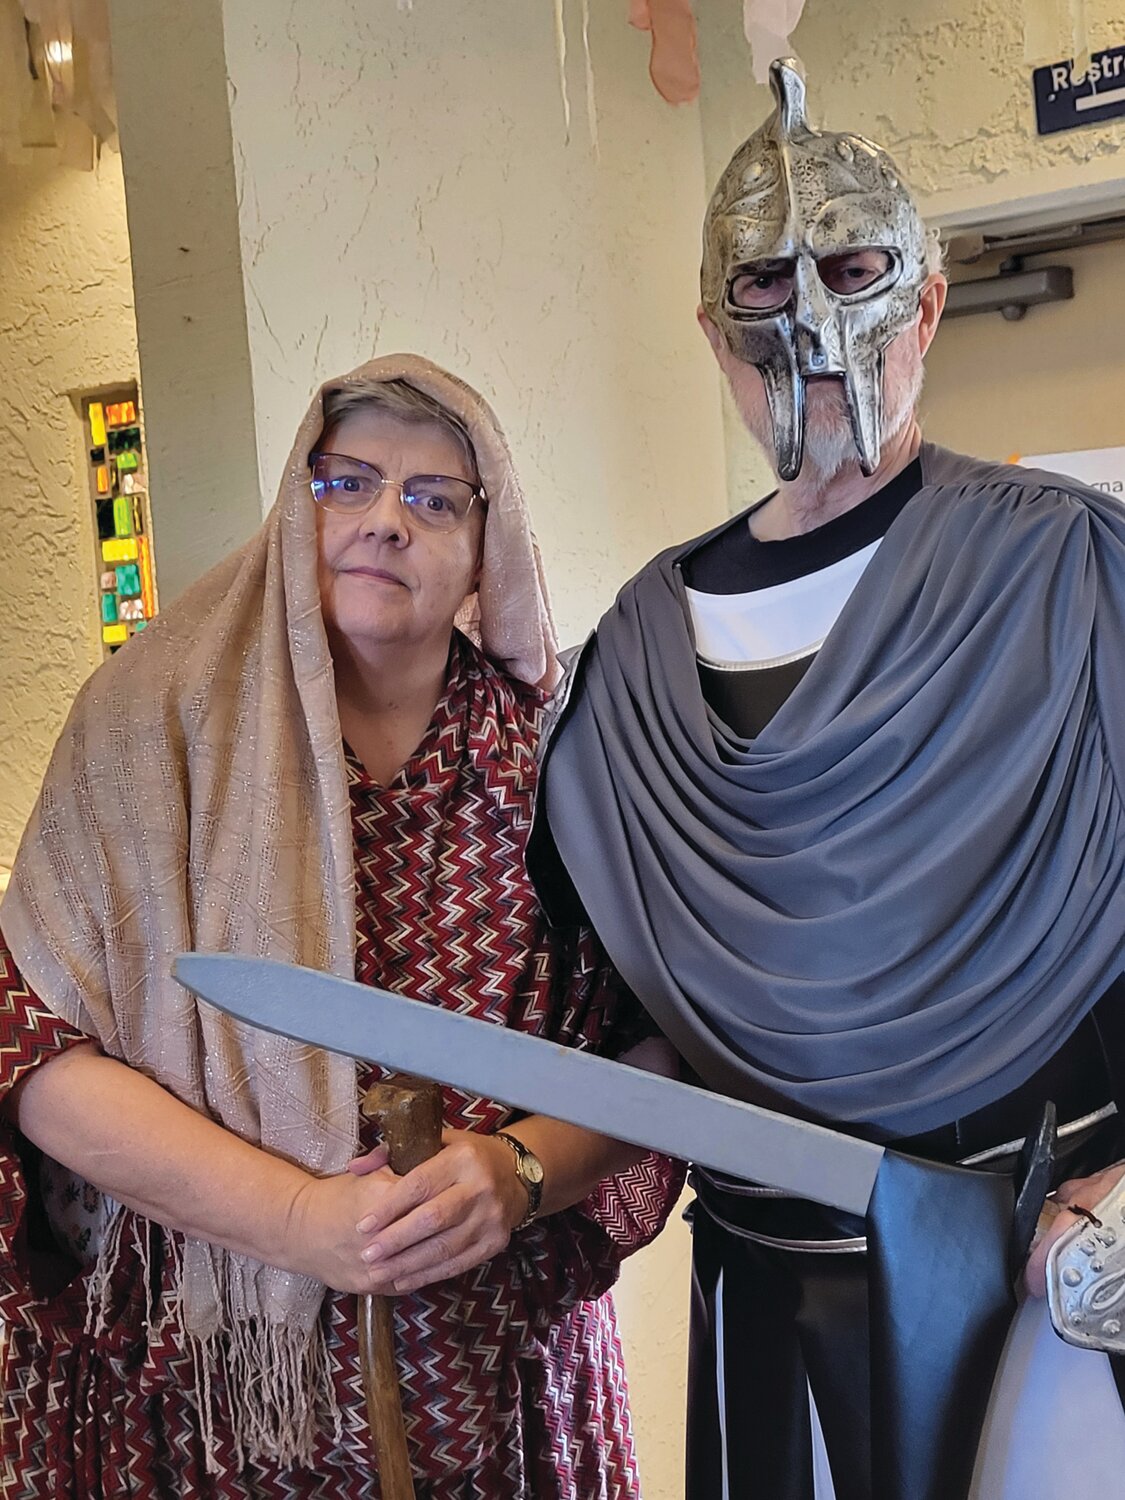 Of course, a Roman soldier guarded the city gates to keep order while a temple scribe shared the customs at the temple. (Photo courtesy of Shepherd of the Hills Lutheran Church)